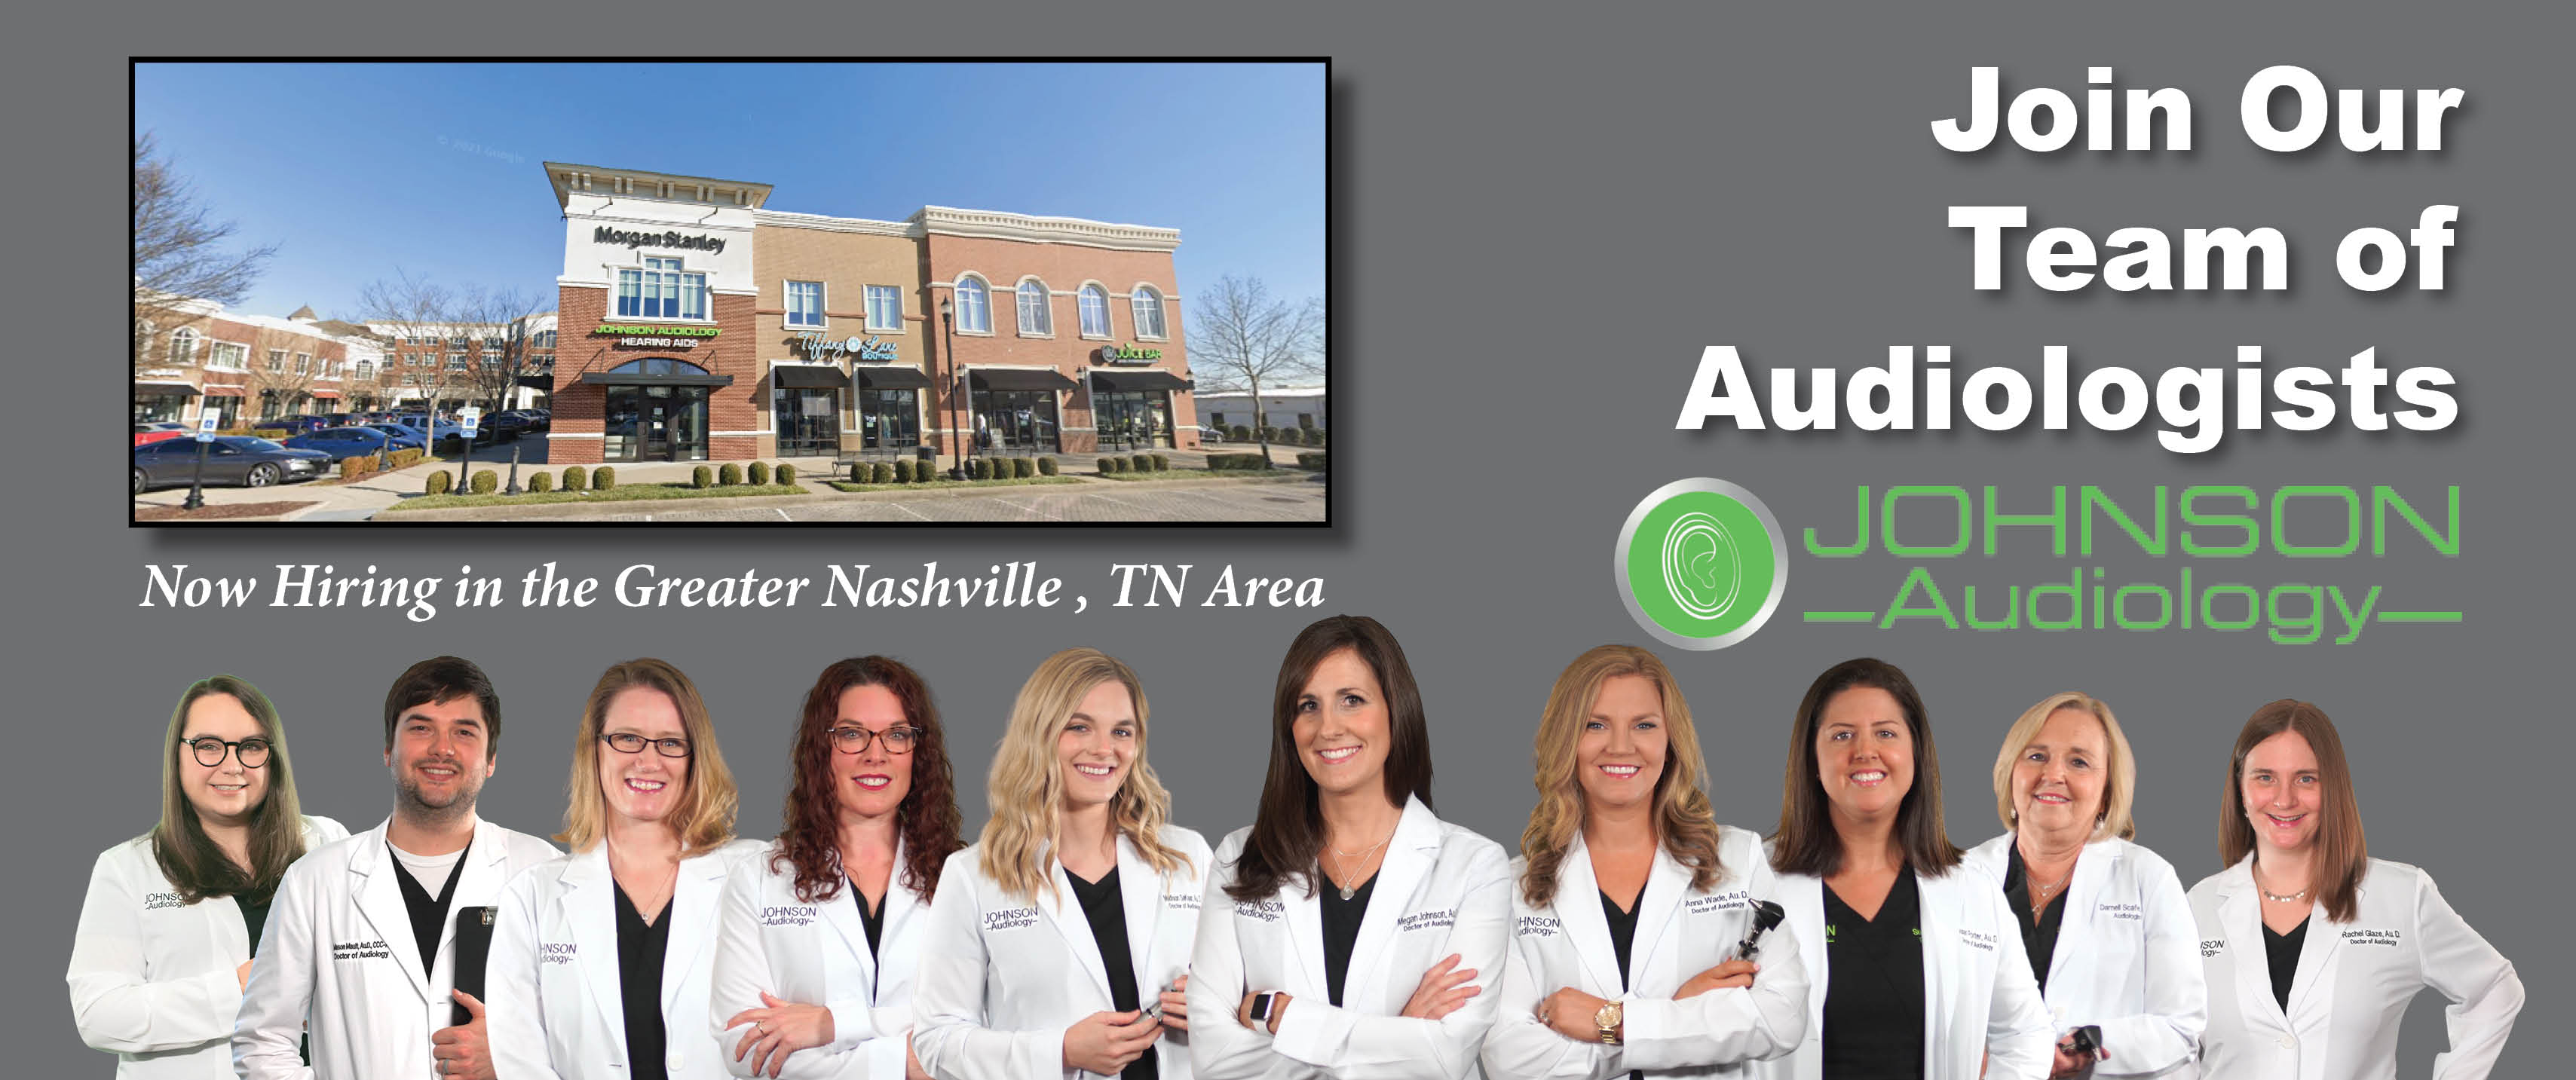 Audiologist Needed in Franklin, TN!